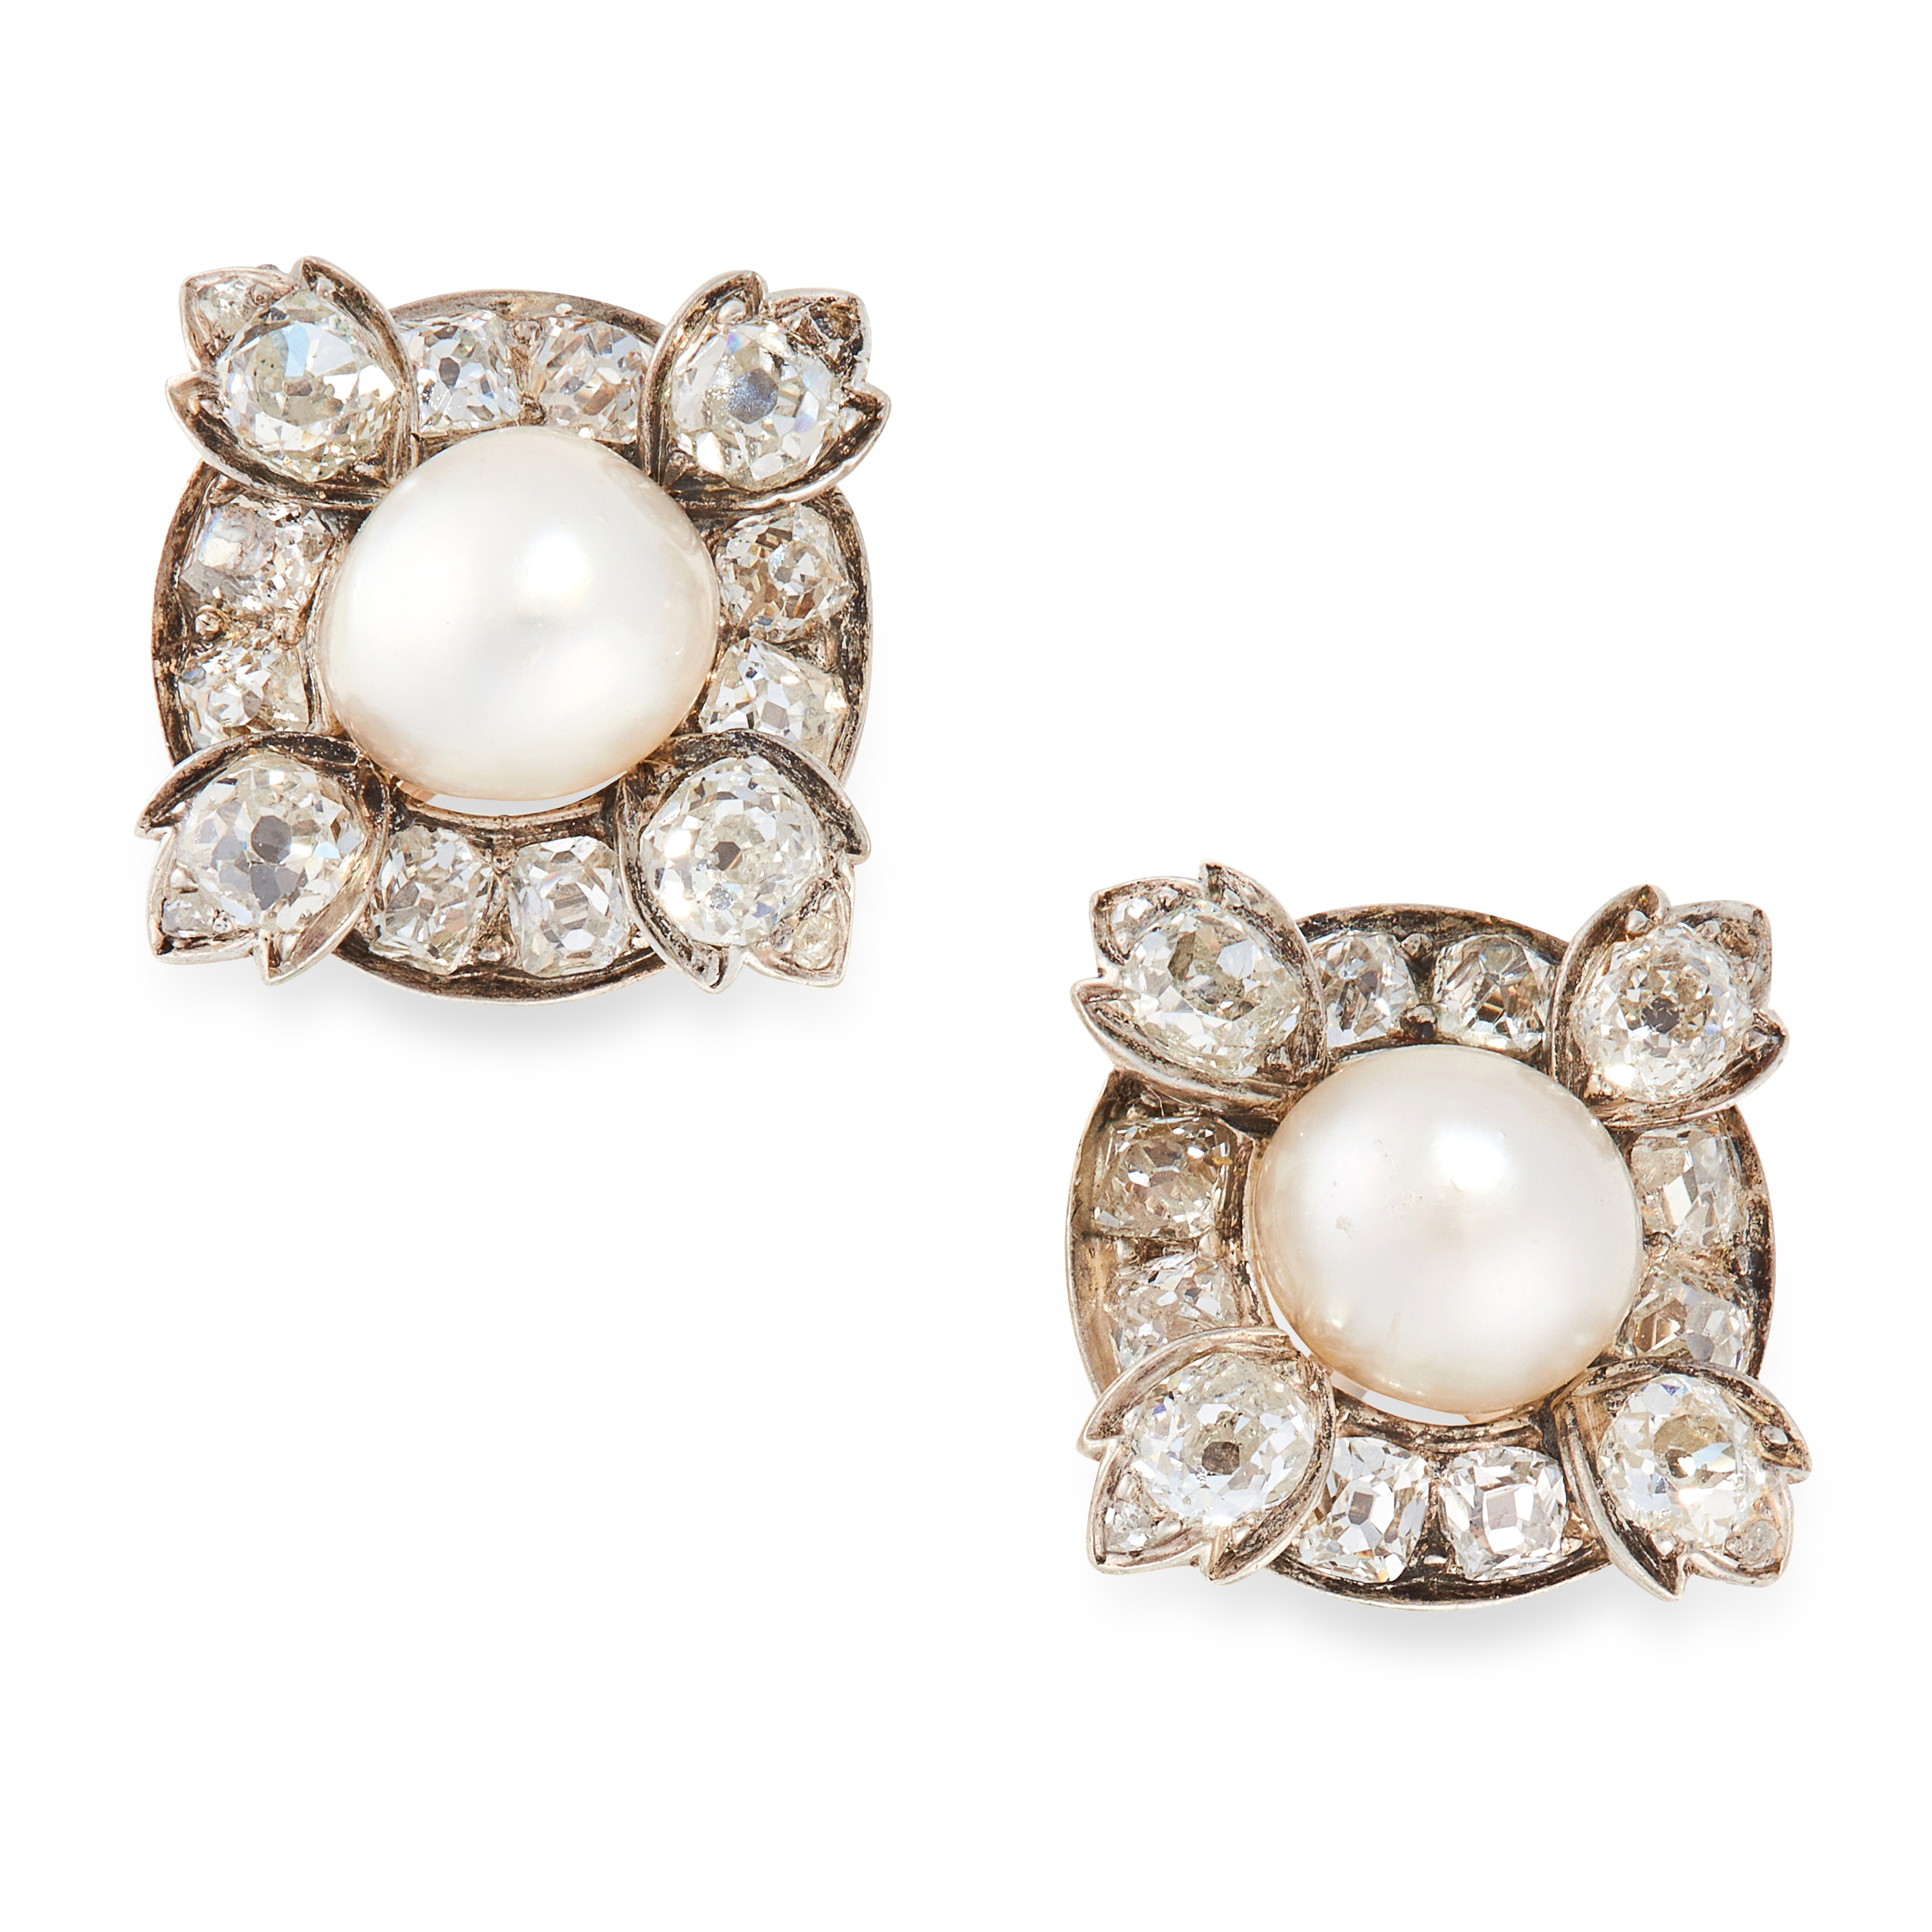 A PAIR OF ANTIQUE NATURAL SALTWATER PEARL AND DIAMOND EARRINGS each set with a natural saltwater